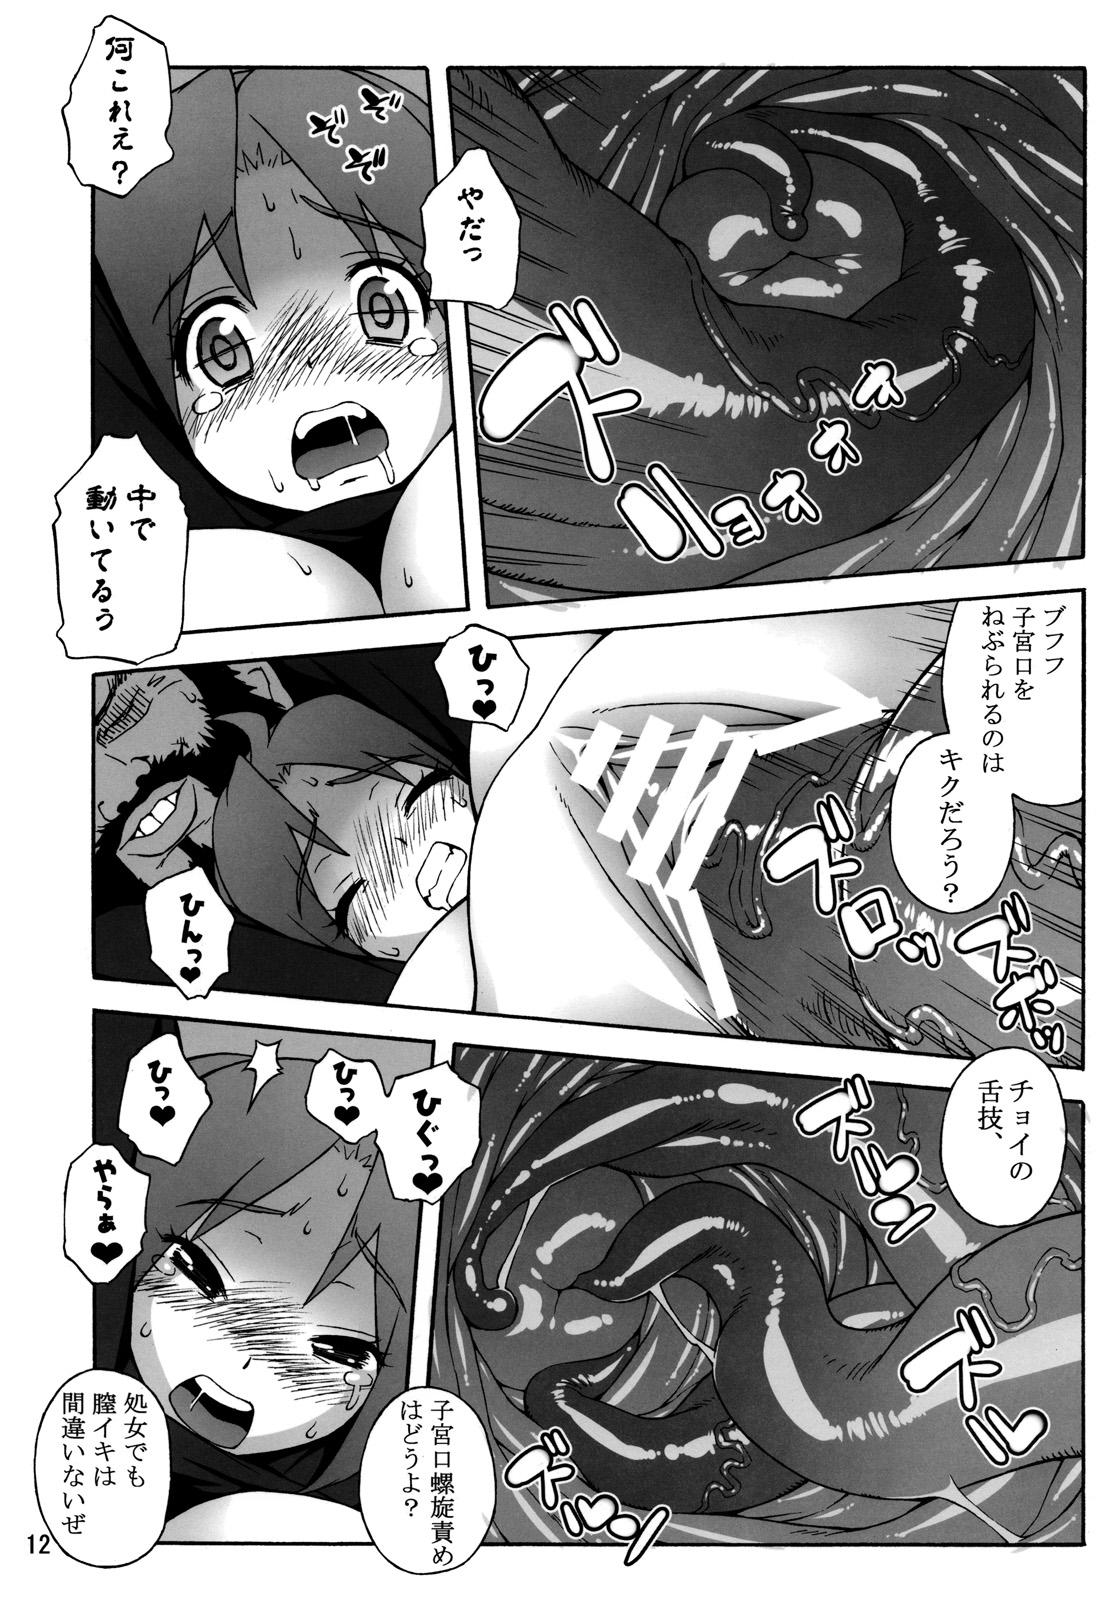 Blackdick A.N.T.R. - King of fighters Gay Rimming - Page 11